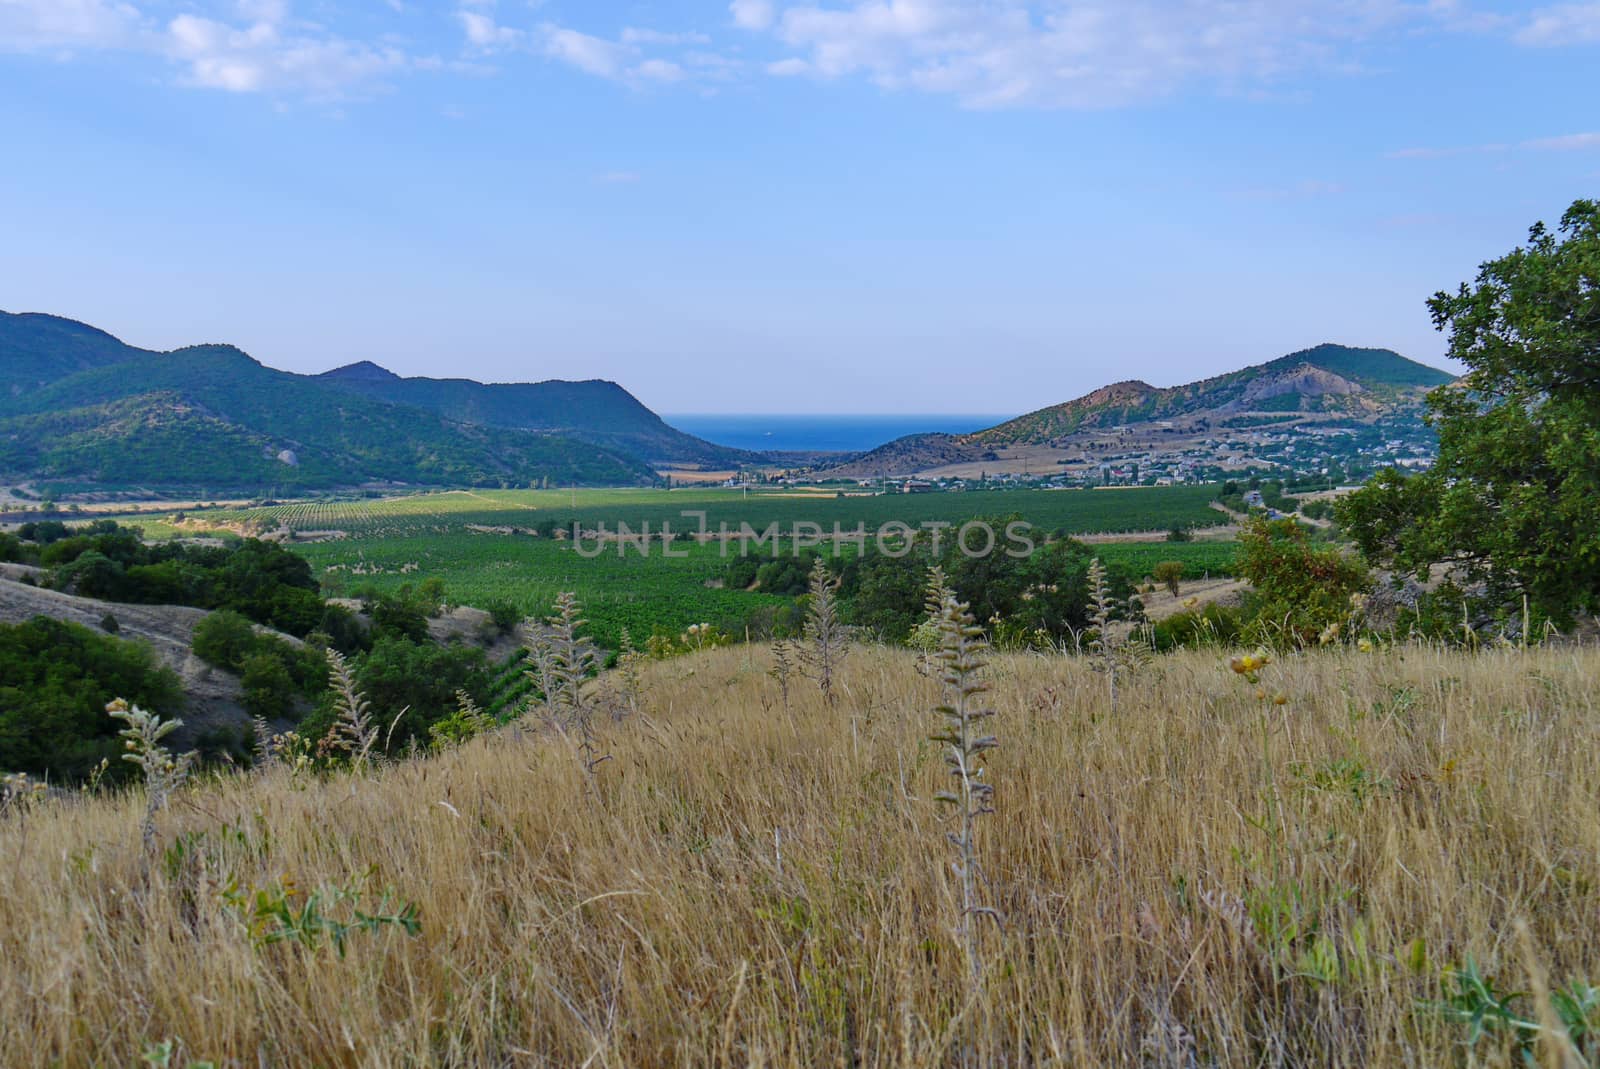 Beautiful view of the mountain valley with bright green coloring of the vegetation in it. With visible houses near the foot of the mountain and blue sea visible between the slope